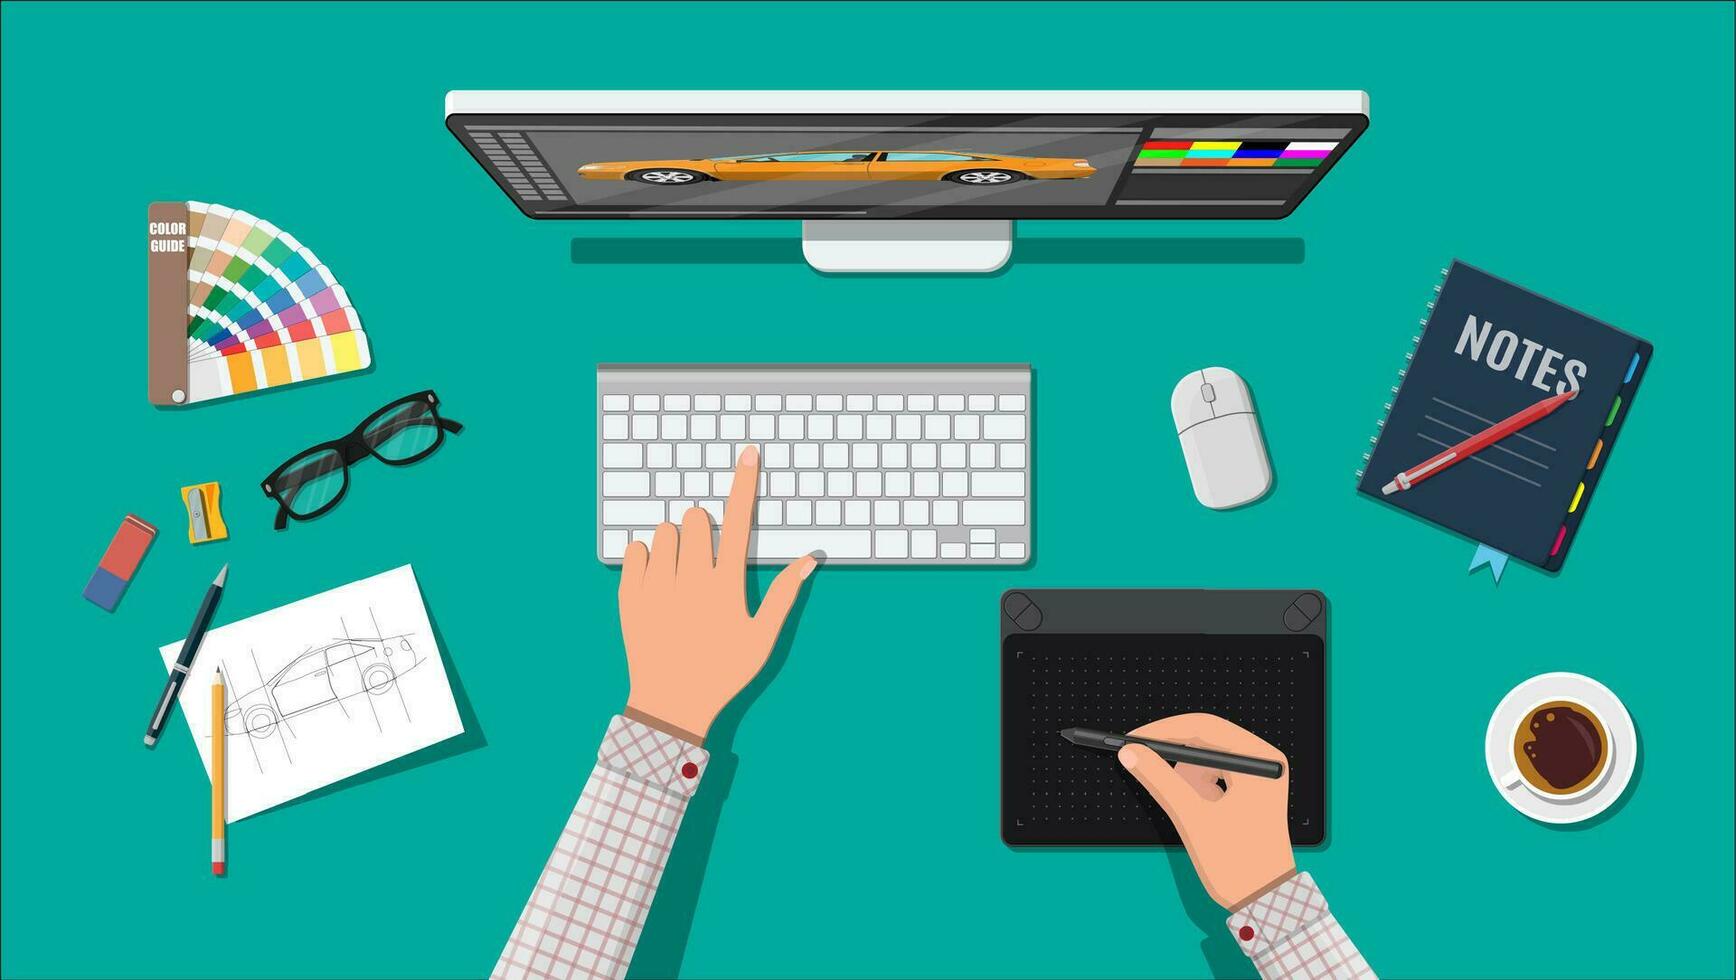 Designer workplace. Illustrator desktop with tools. Desktop pc, keyboard, mouse, glasses, notes, pen, coffee. Sketch on paper blank. Hands drawing on graphic tablet. Vector illustration in flat style